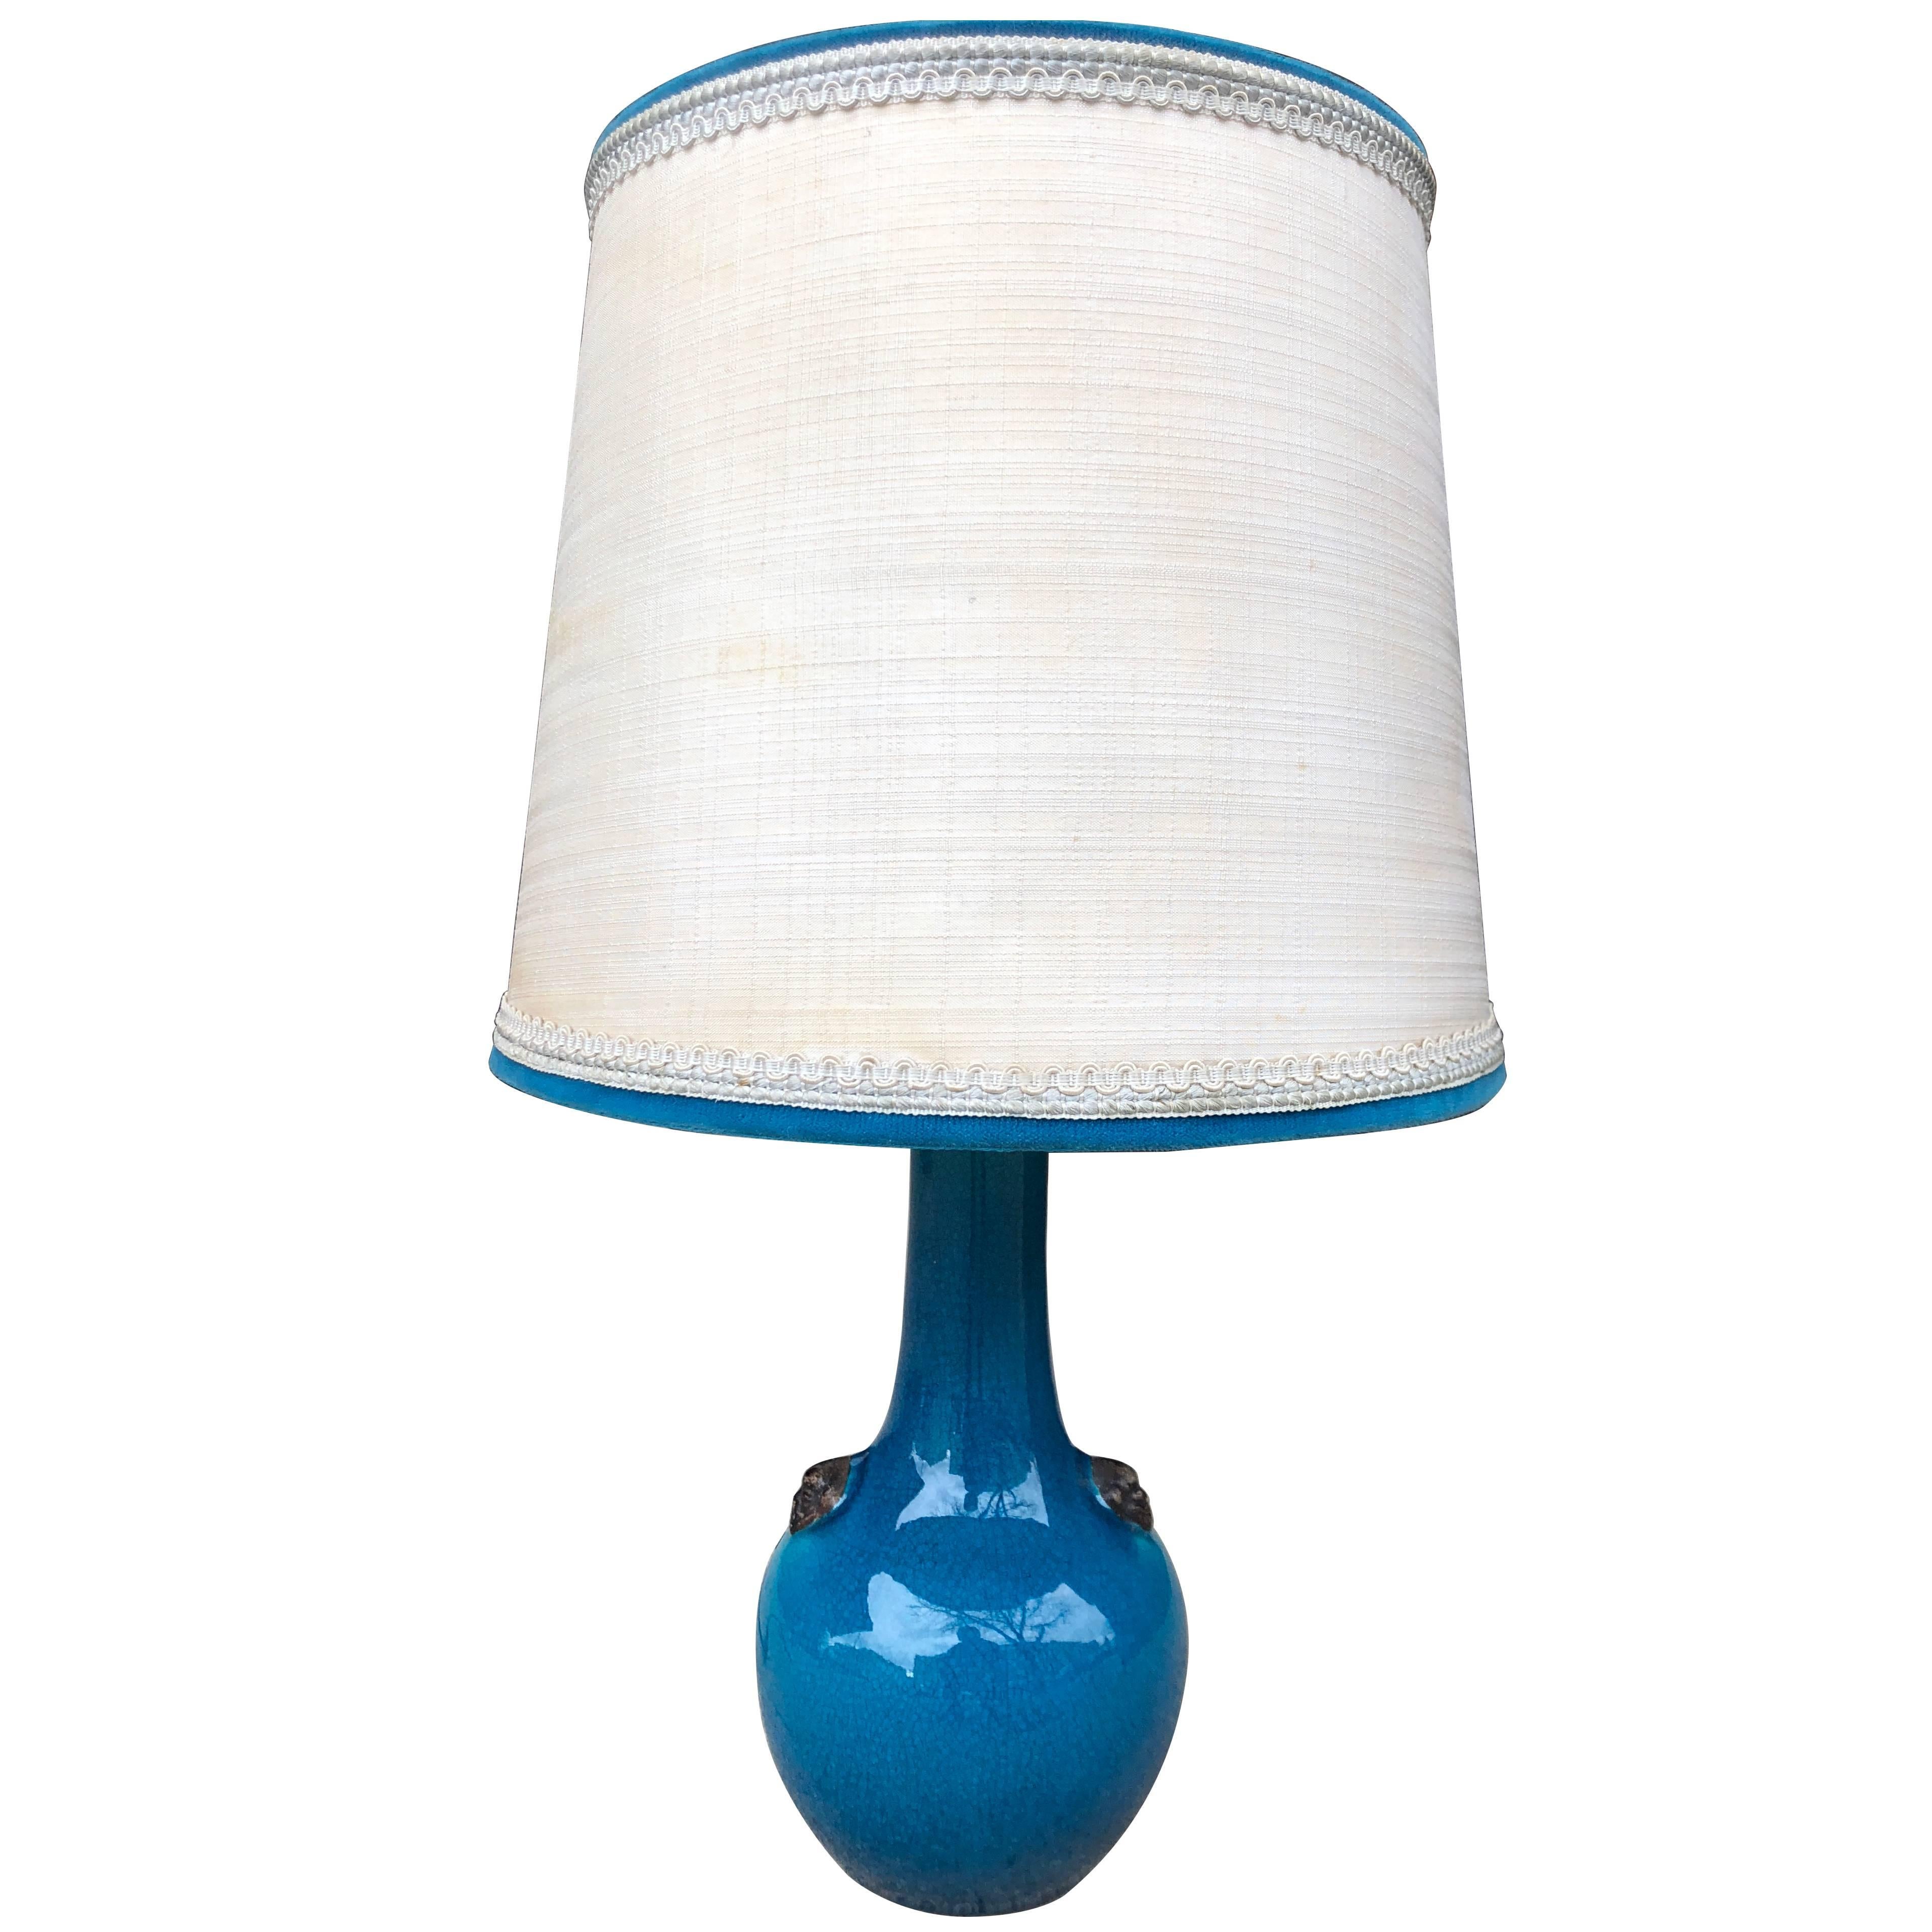 Pol Chambost Blue Craqueleur Lamp with Original Shade; Signed For Sale